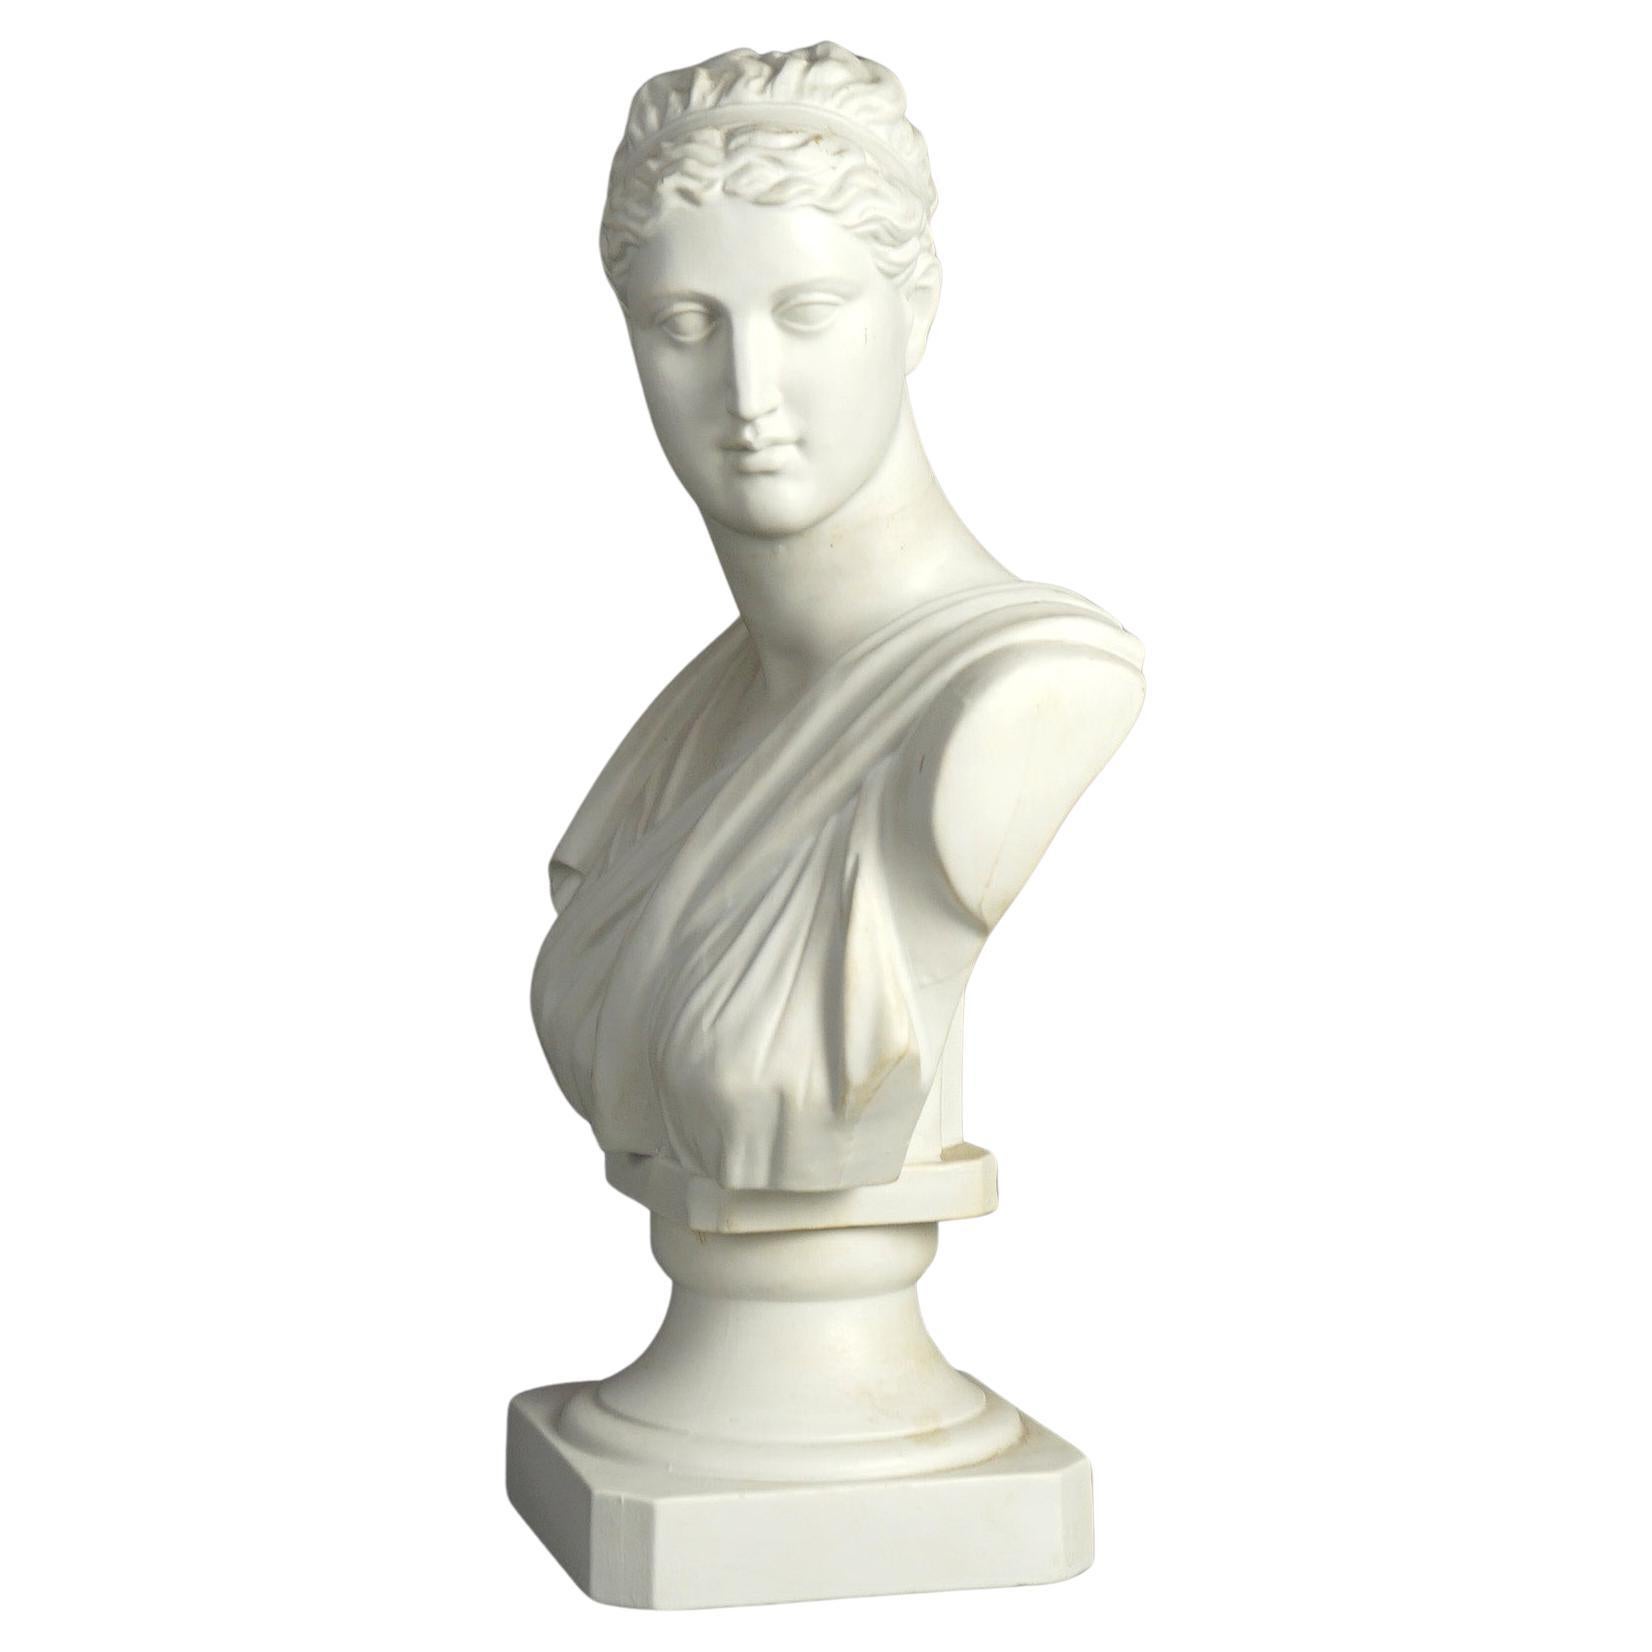 Antique French Neoclassical Parian Porcelain Bust of Diana C1900

Measures- 17.5''H x 9.75''W x 6''D